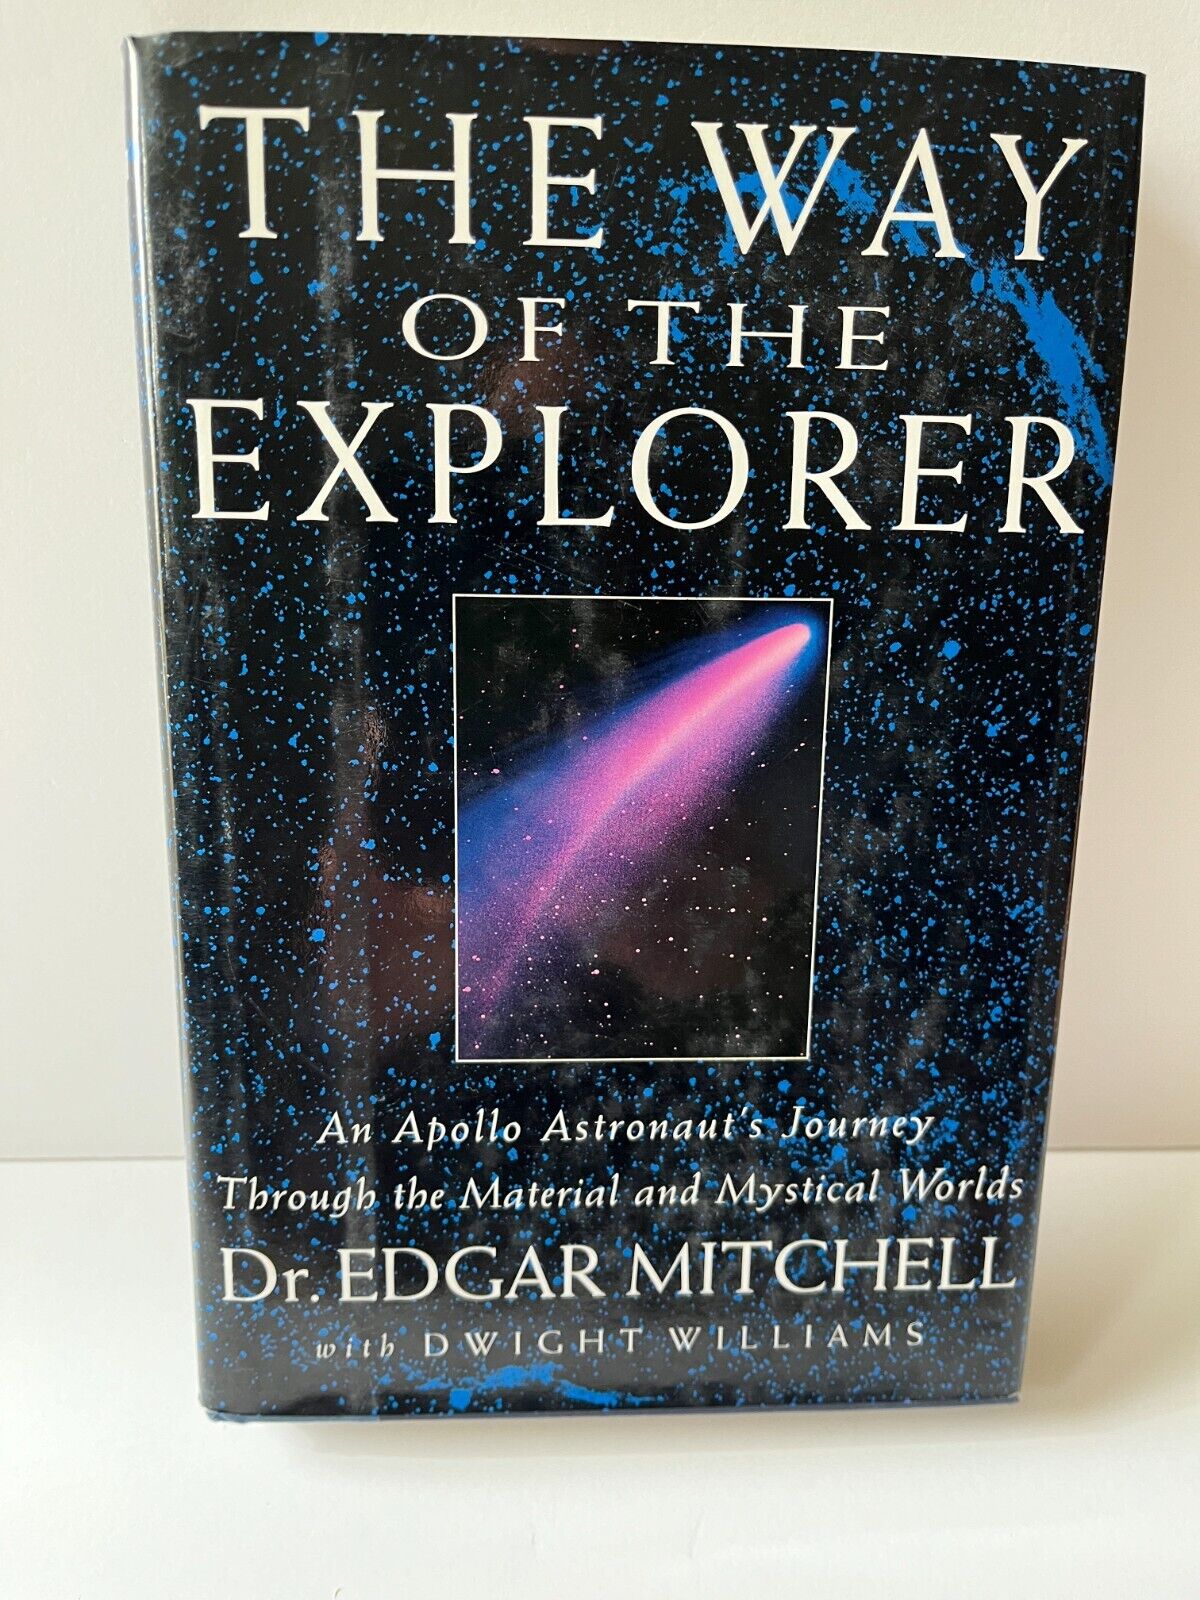 EDGAR MITCHELL SIGNED- Apollo 14-The Way of the Explorer, 1st ed/1st print. Moon